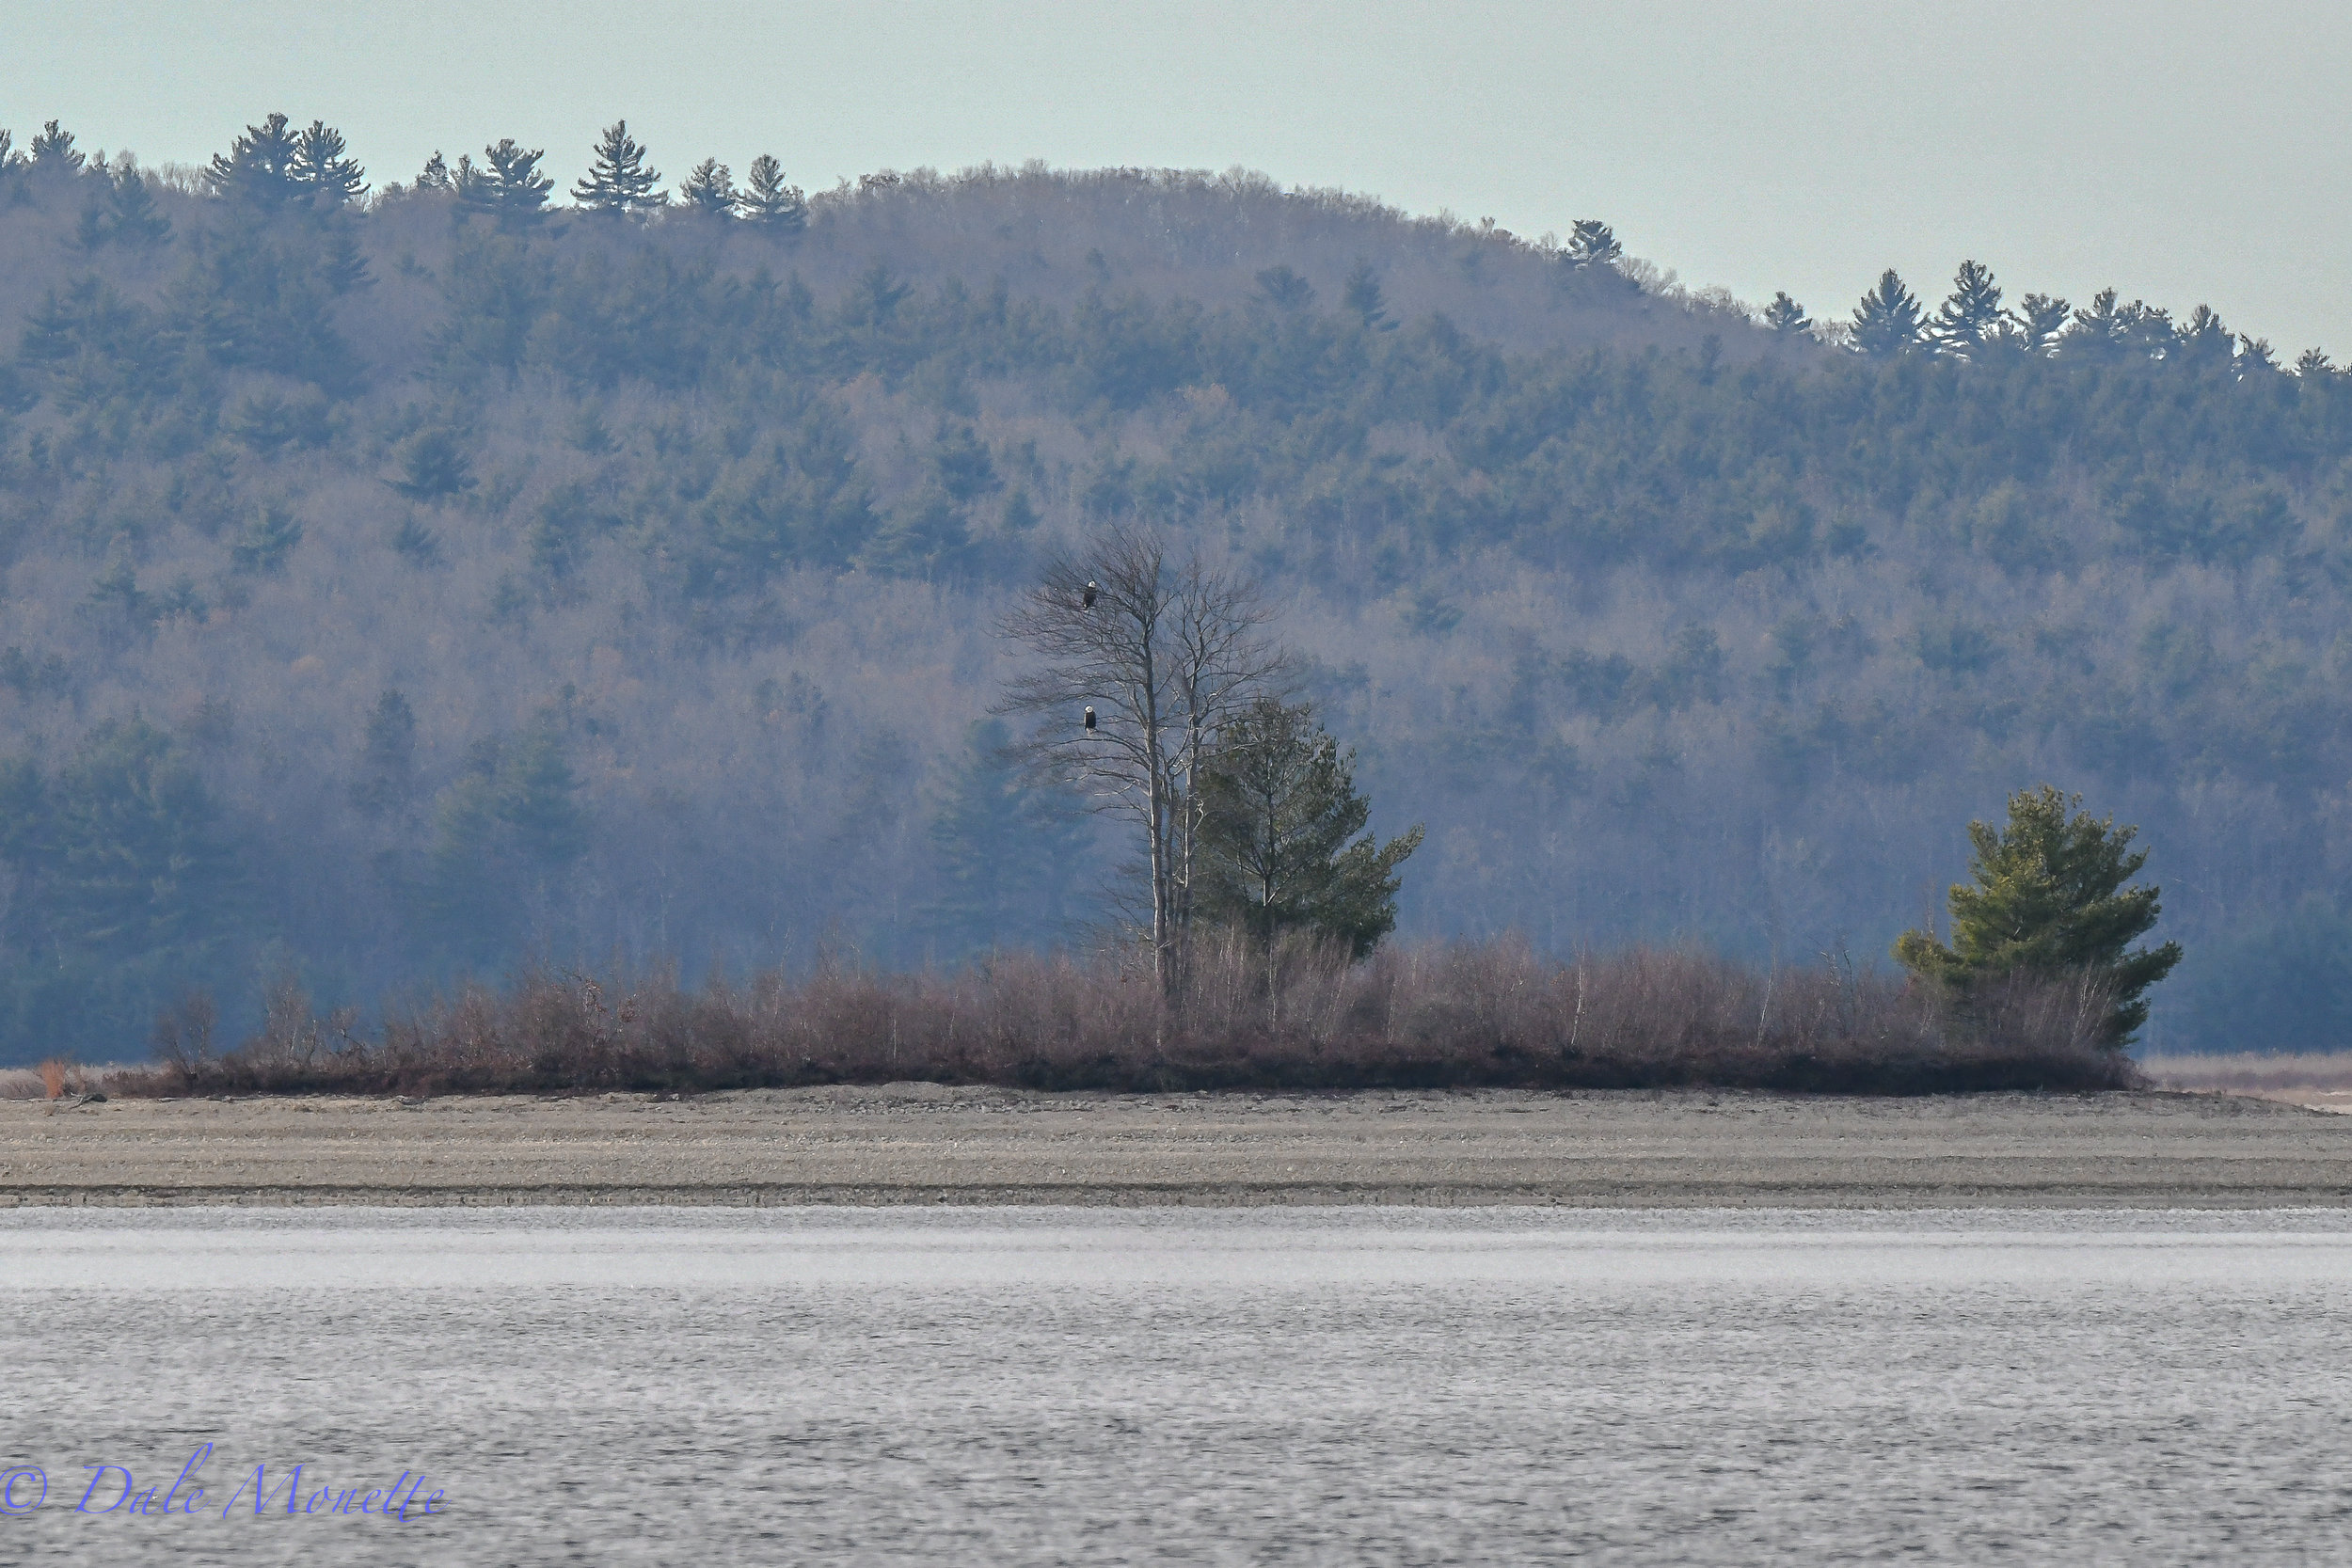   A mated pair of bald eagles sit together on Lone Tree Island in the Quabbin Reservoir, not far from their long time nest and ponder the coming winter and impending ice over that comes with it on the water.....  